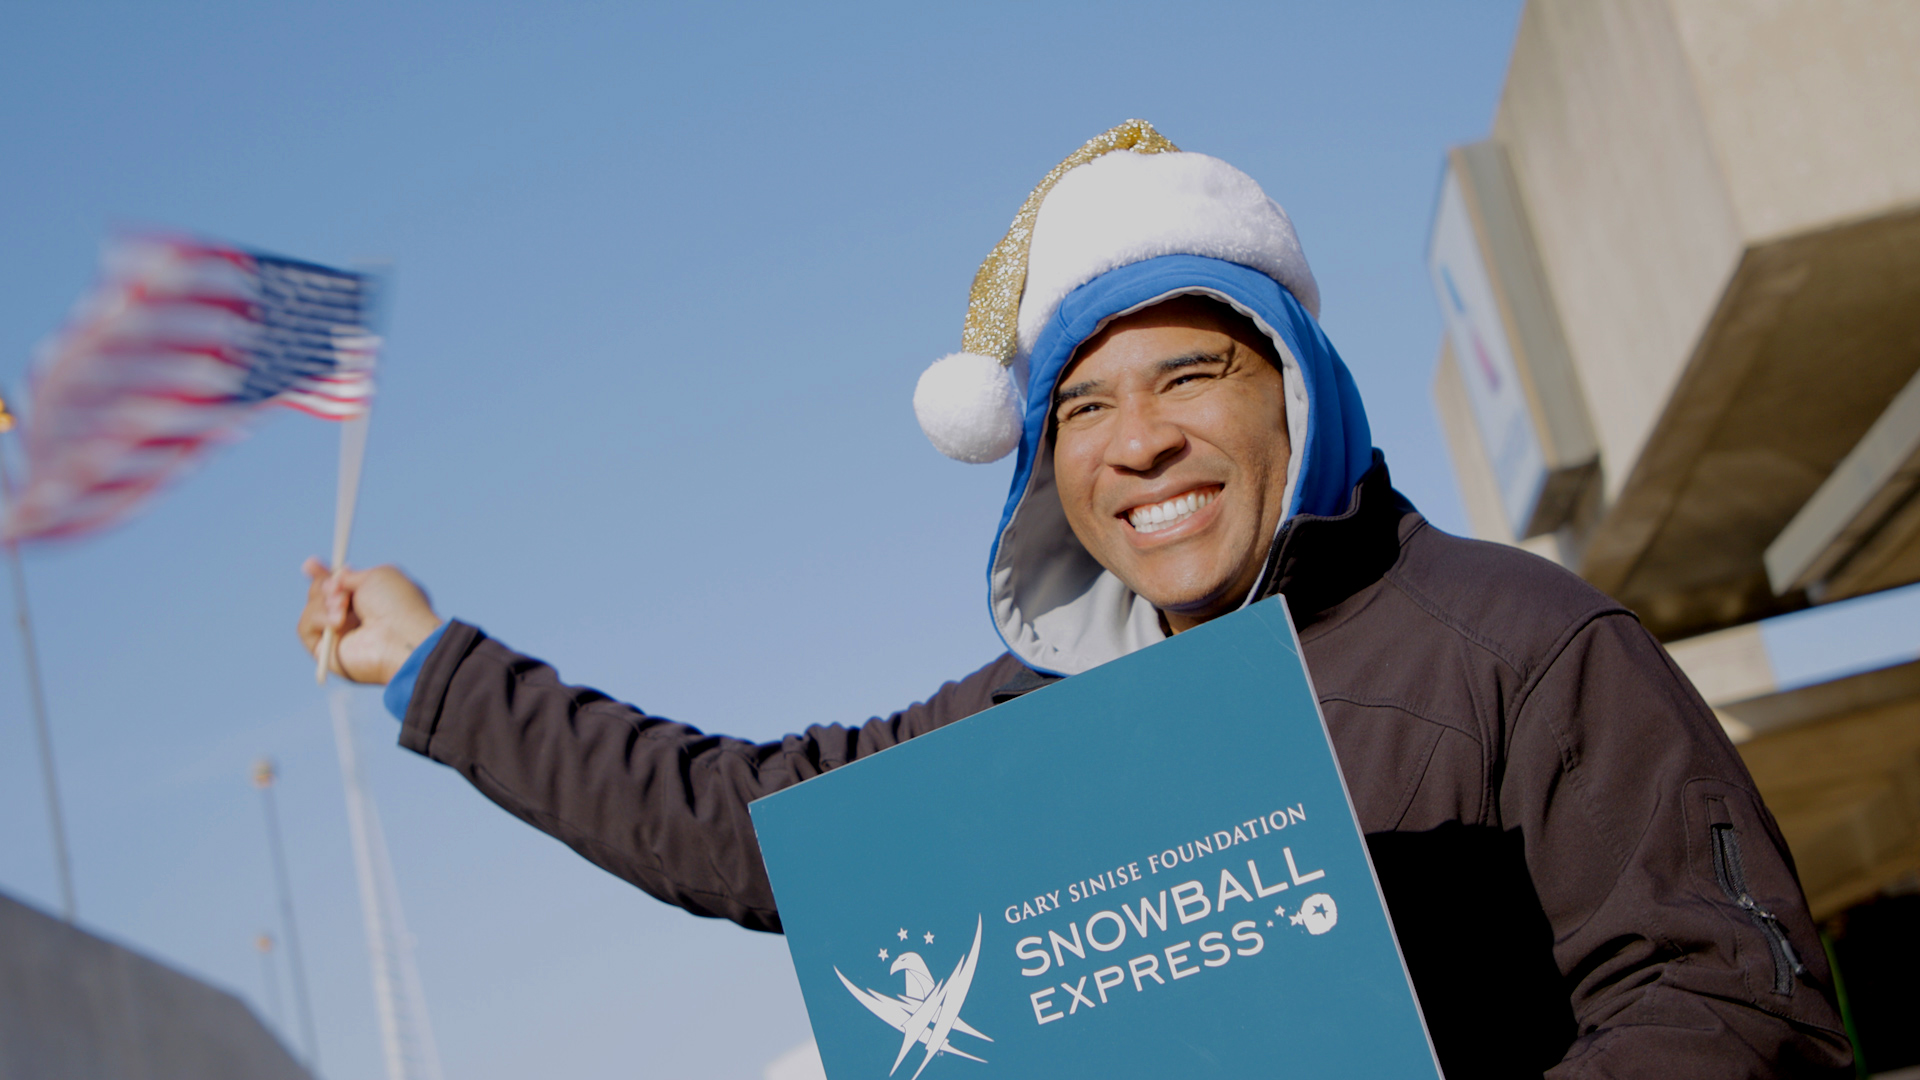 Snowball Express transports Gold Star Families to new holiday